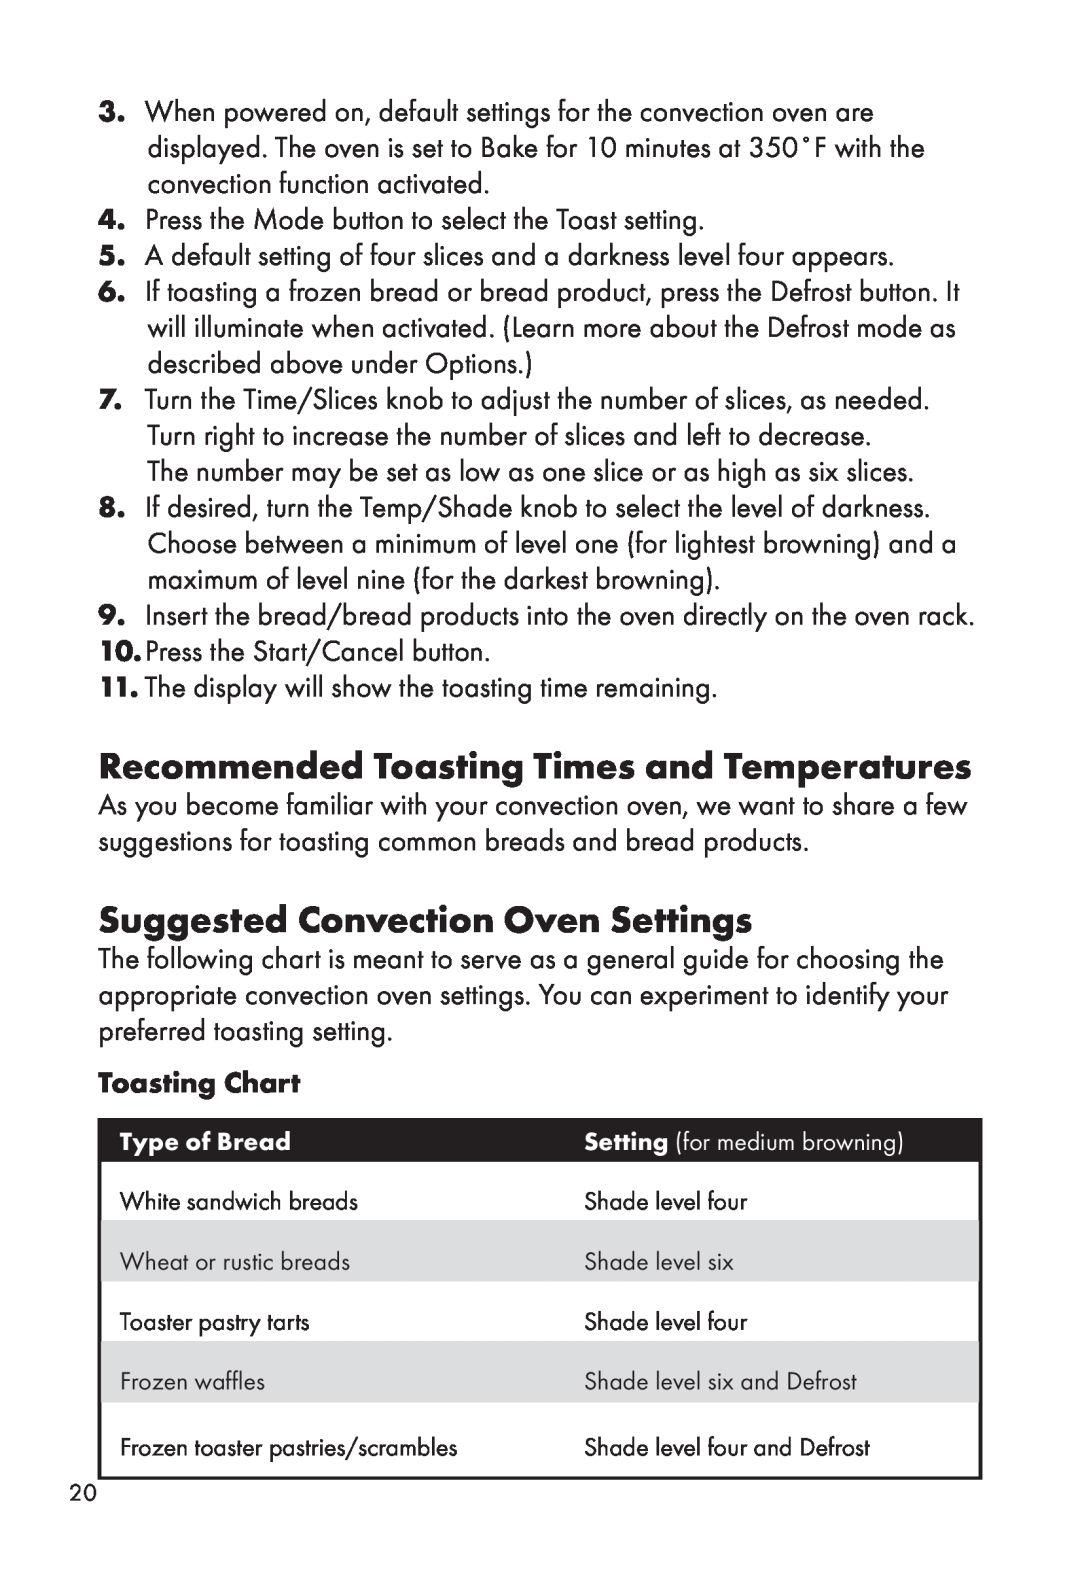 Calphalon HE700CO manual Recommended Toasting Times and Temperatures, Suggested Convection Oven Settings, Toasting Chart 